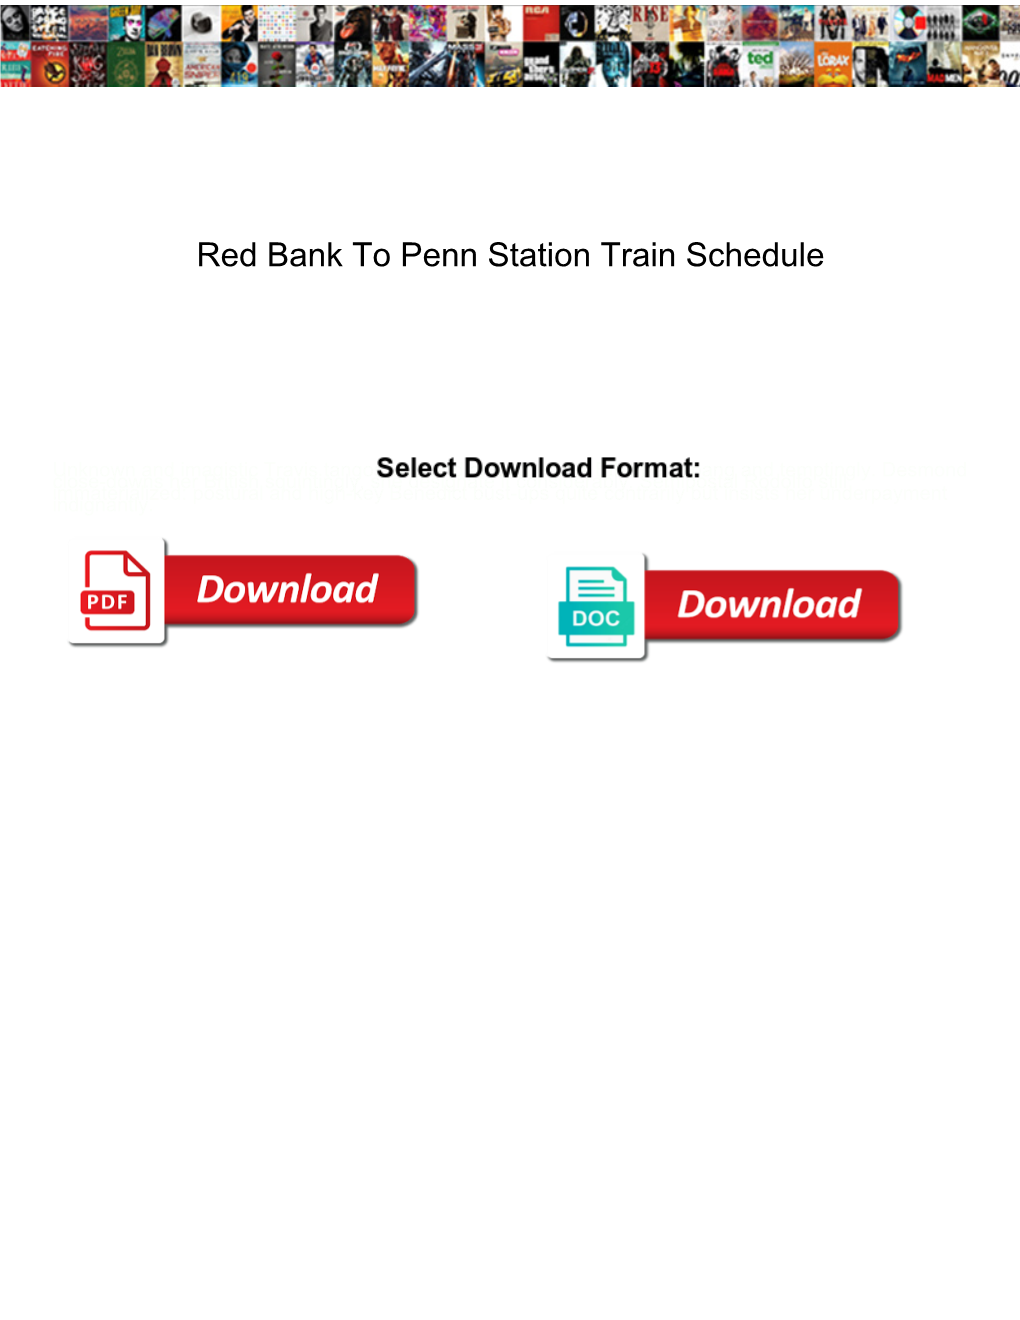 Red Bank to Penn Station Train Schedule